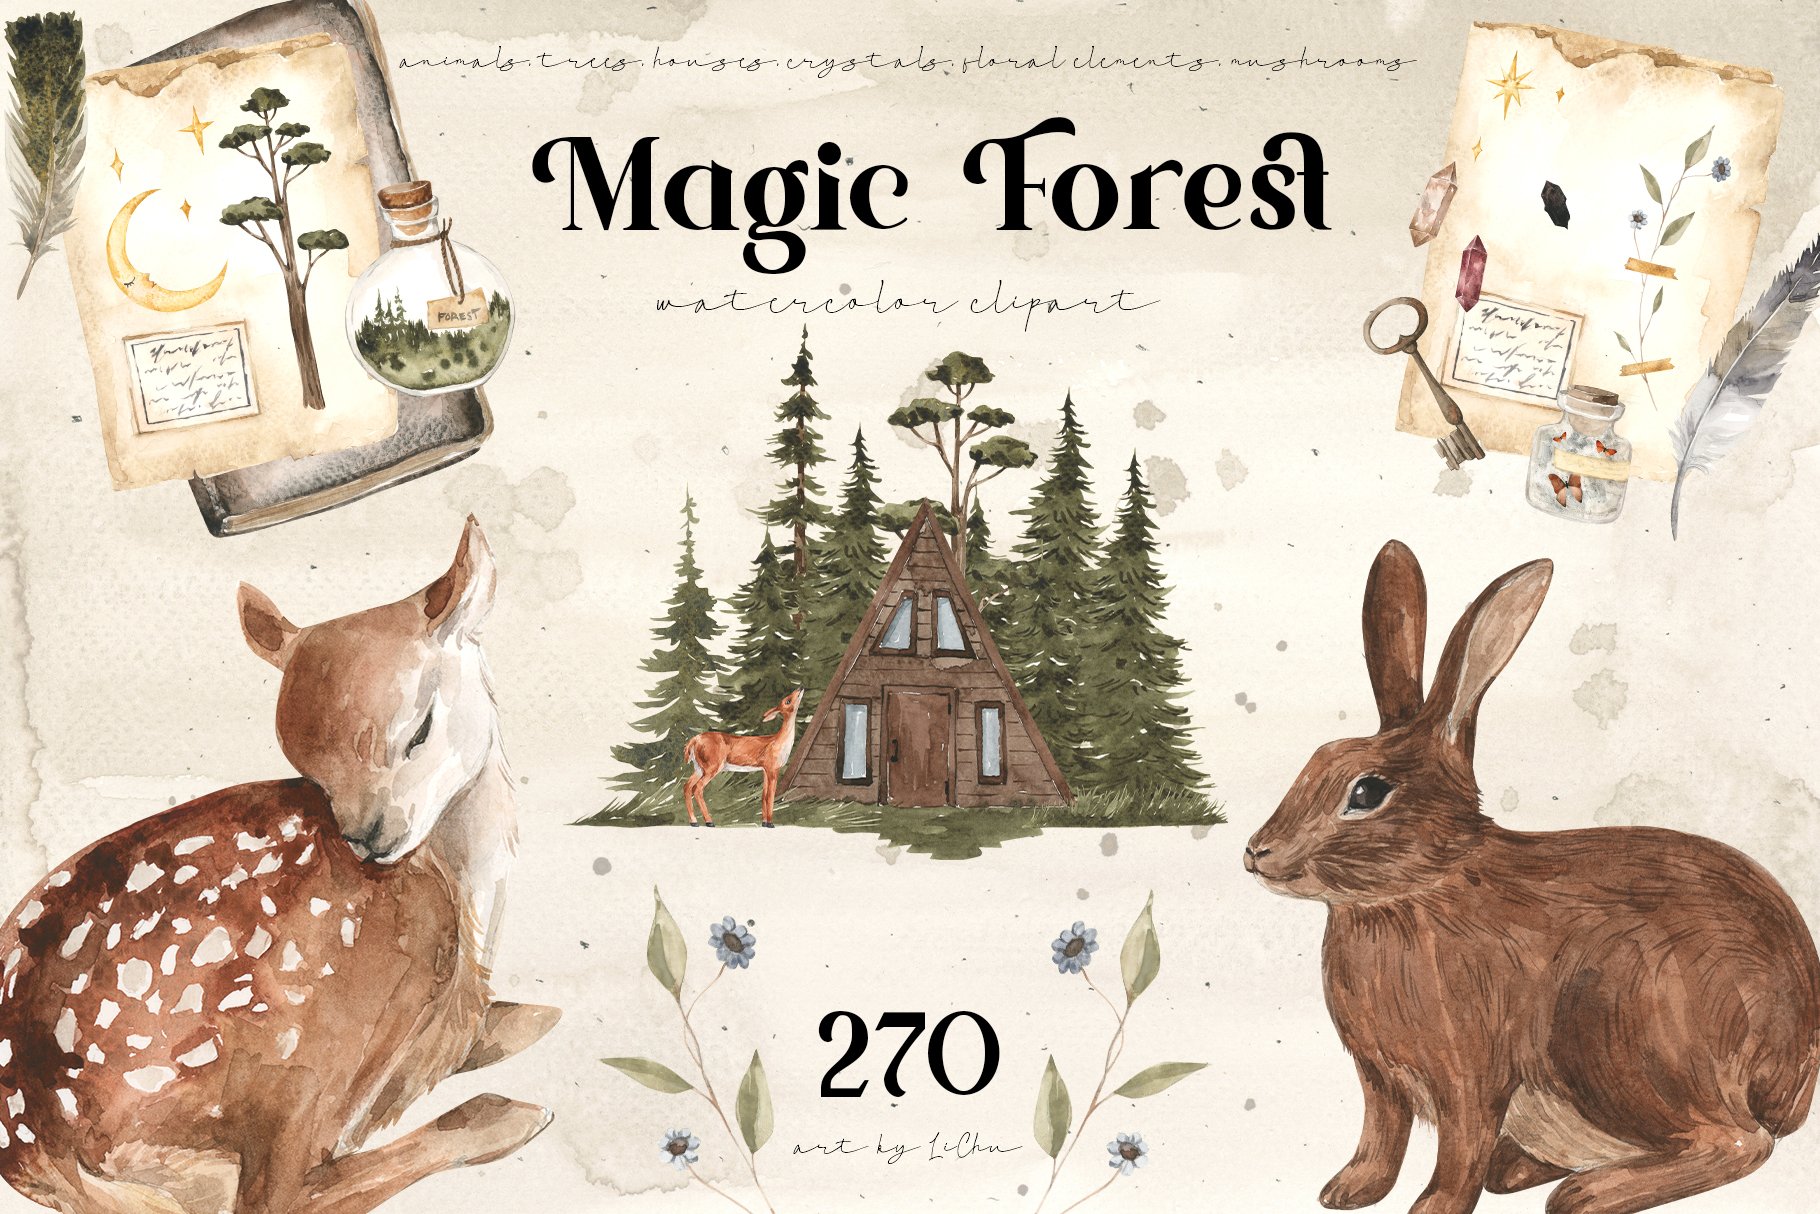 Watercolor Magic Forest cover image.